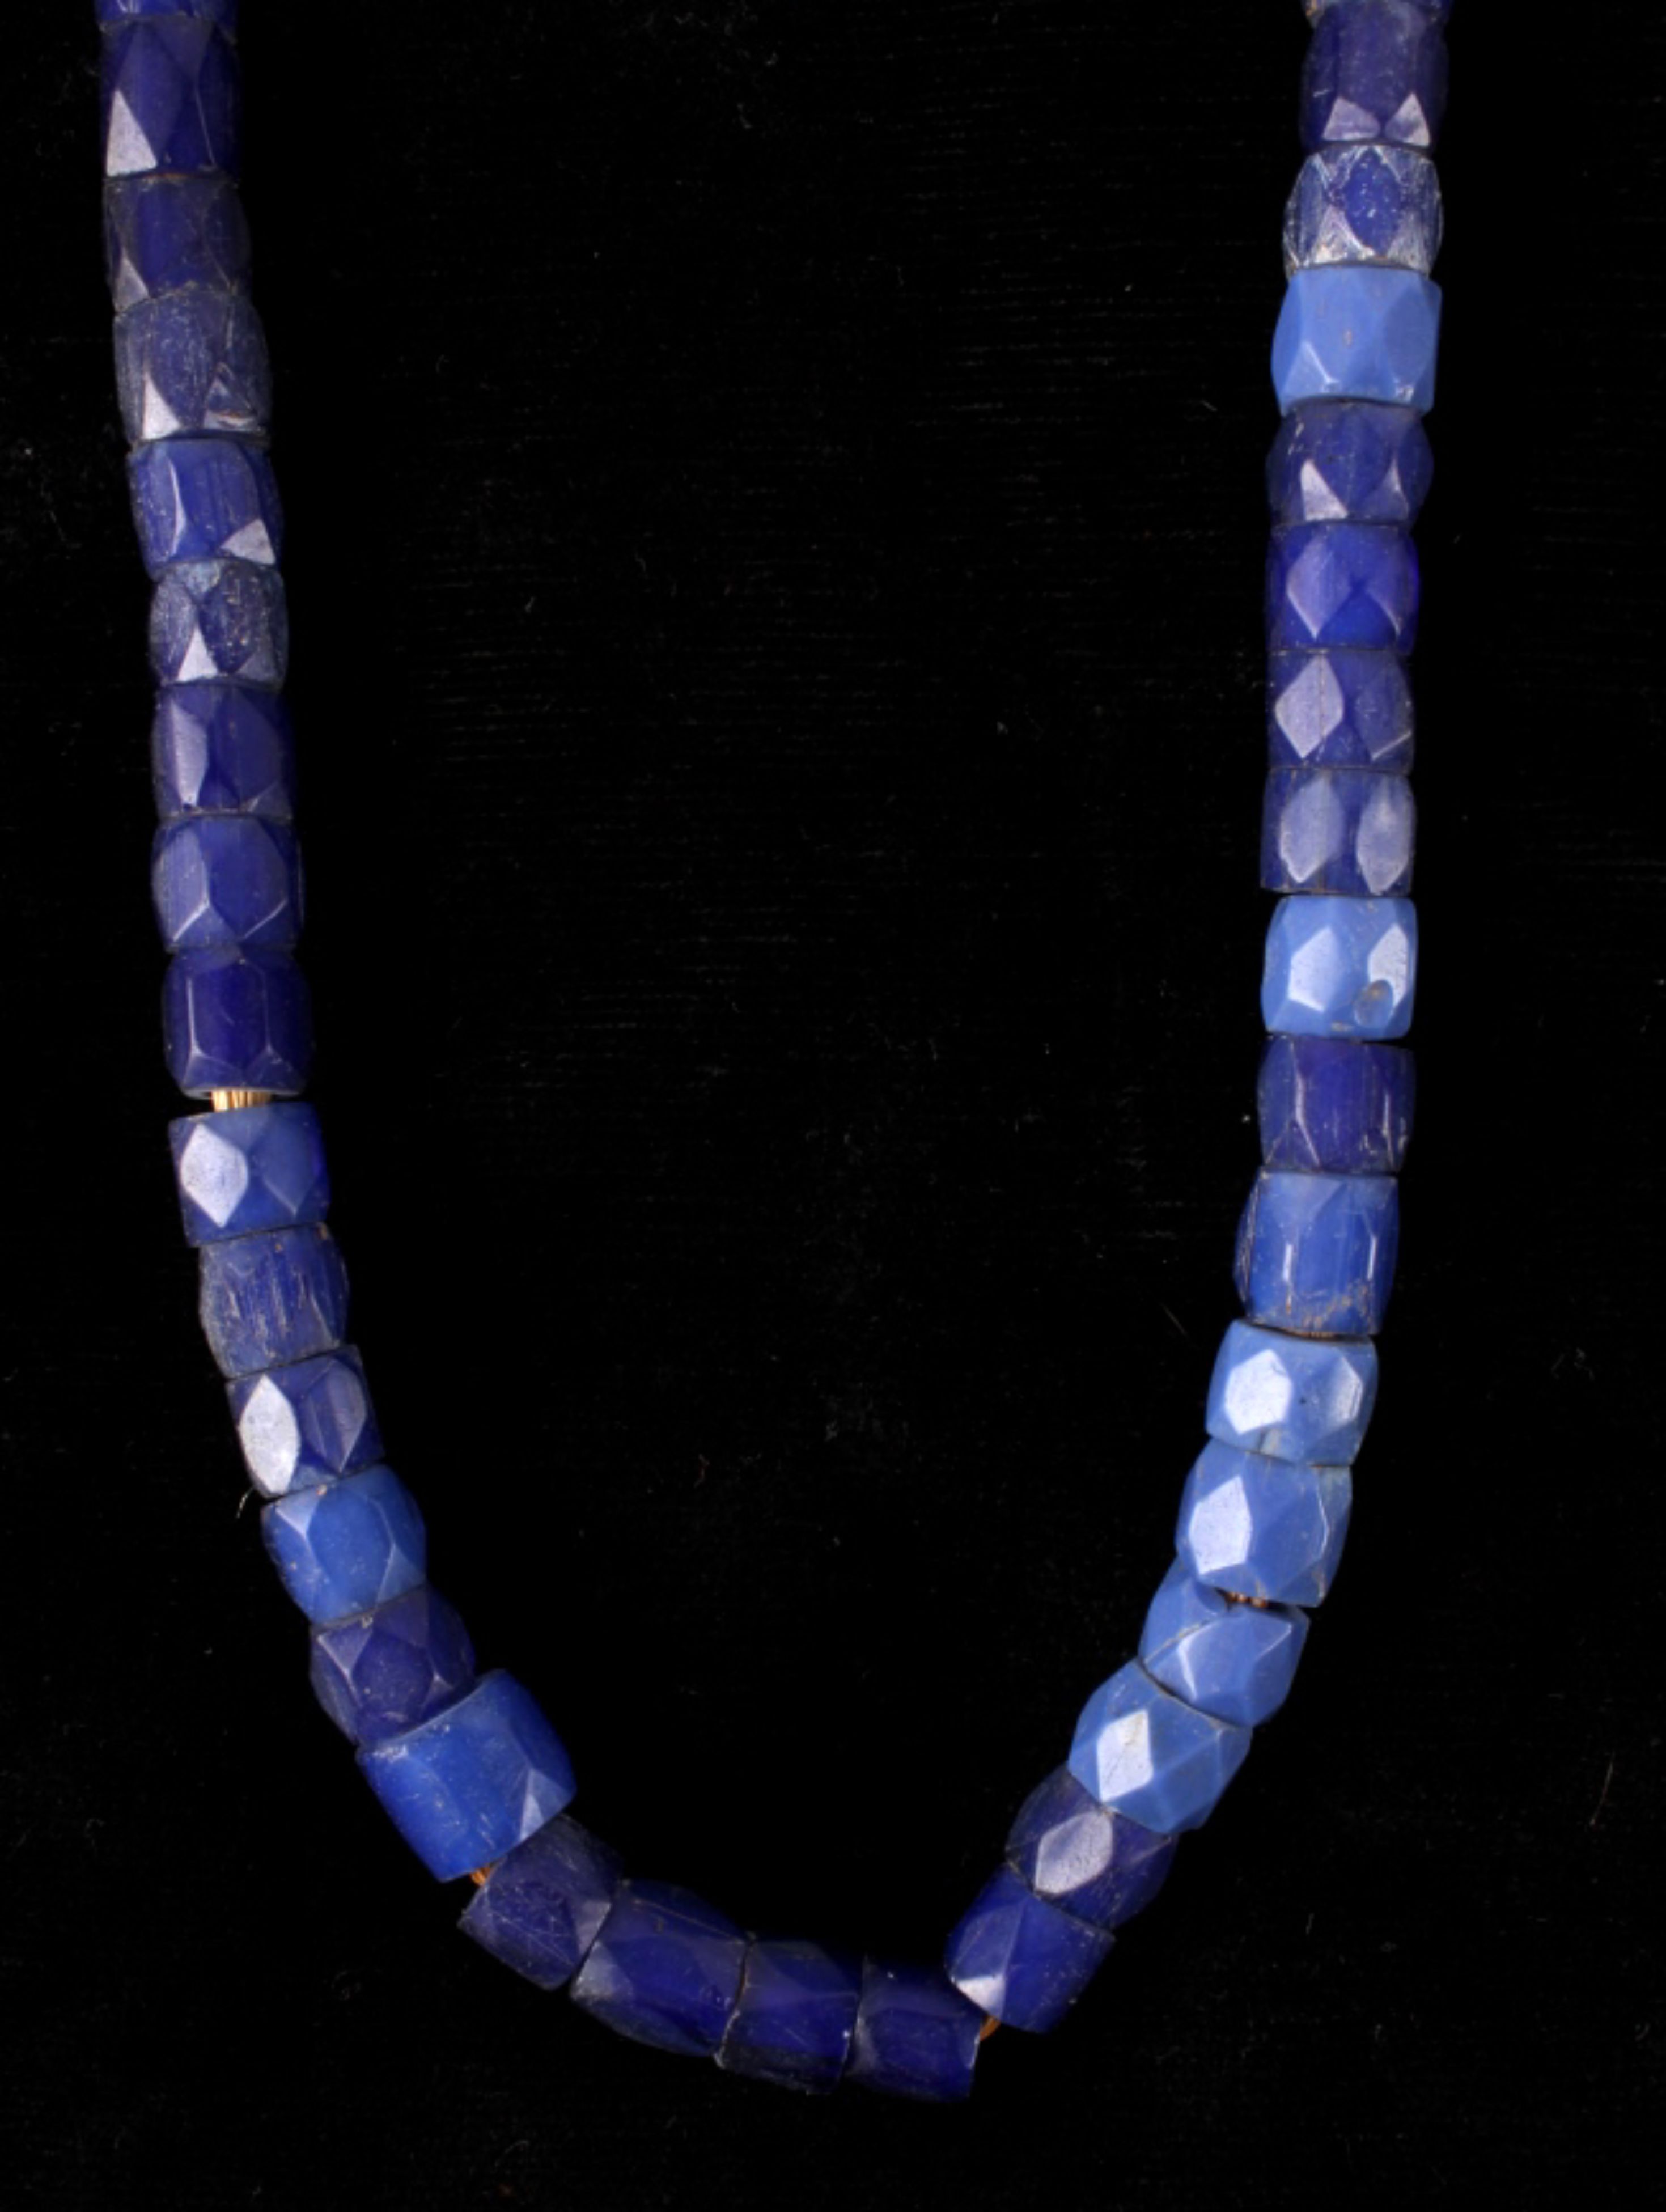 African Cobalt Glass Trade Bead Necklaces - Image 13 of 17